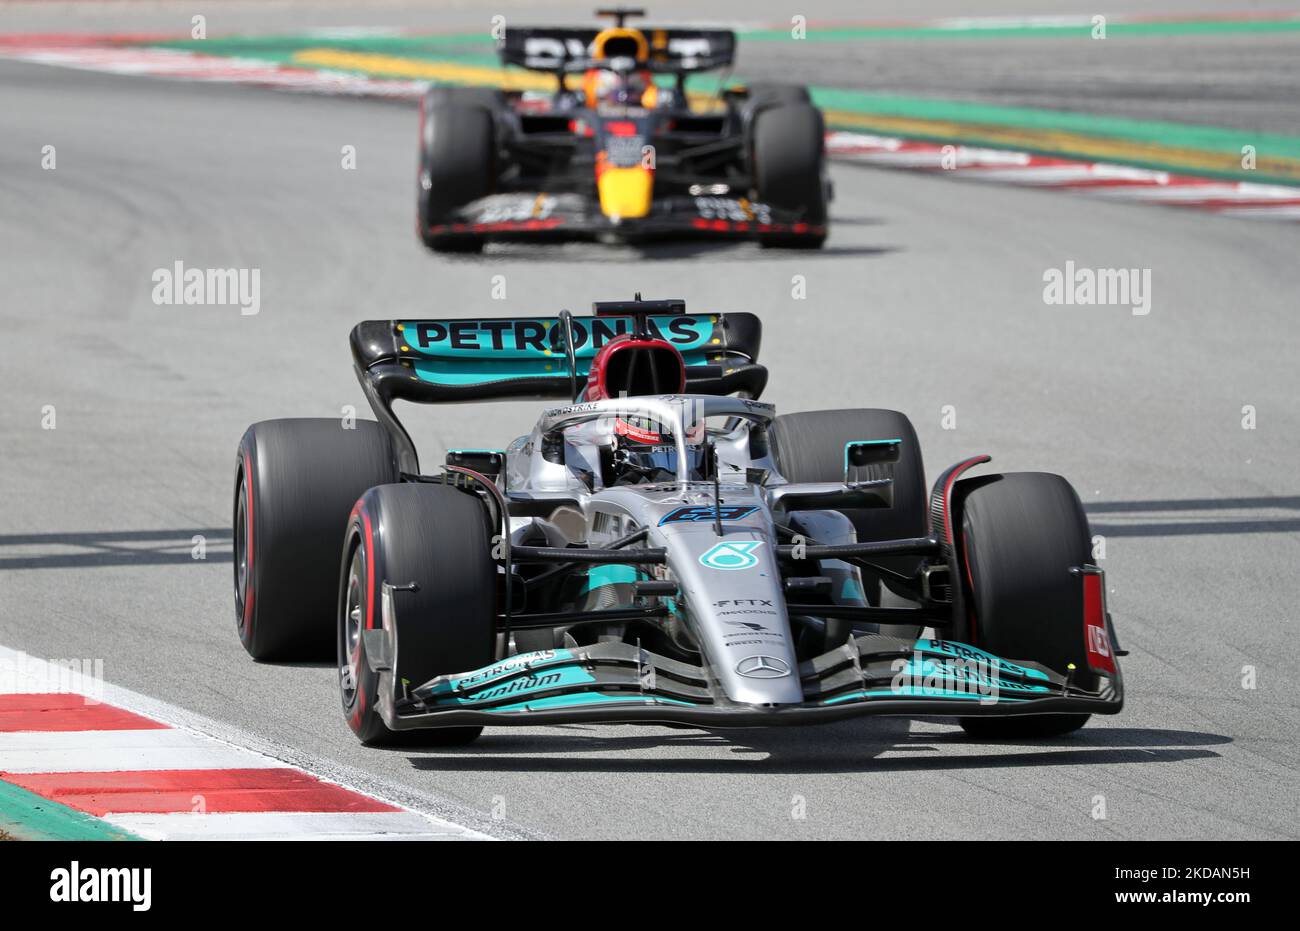 George Russell's Mercedes during the Formula 1 Pirelli GP of Spain, held at the Circuit de Barcelona Catalunya, in Barcelona, on 22th May 2022. -- (Photo by Urbanandsport/NurPhoto) Stock Photo